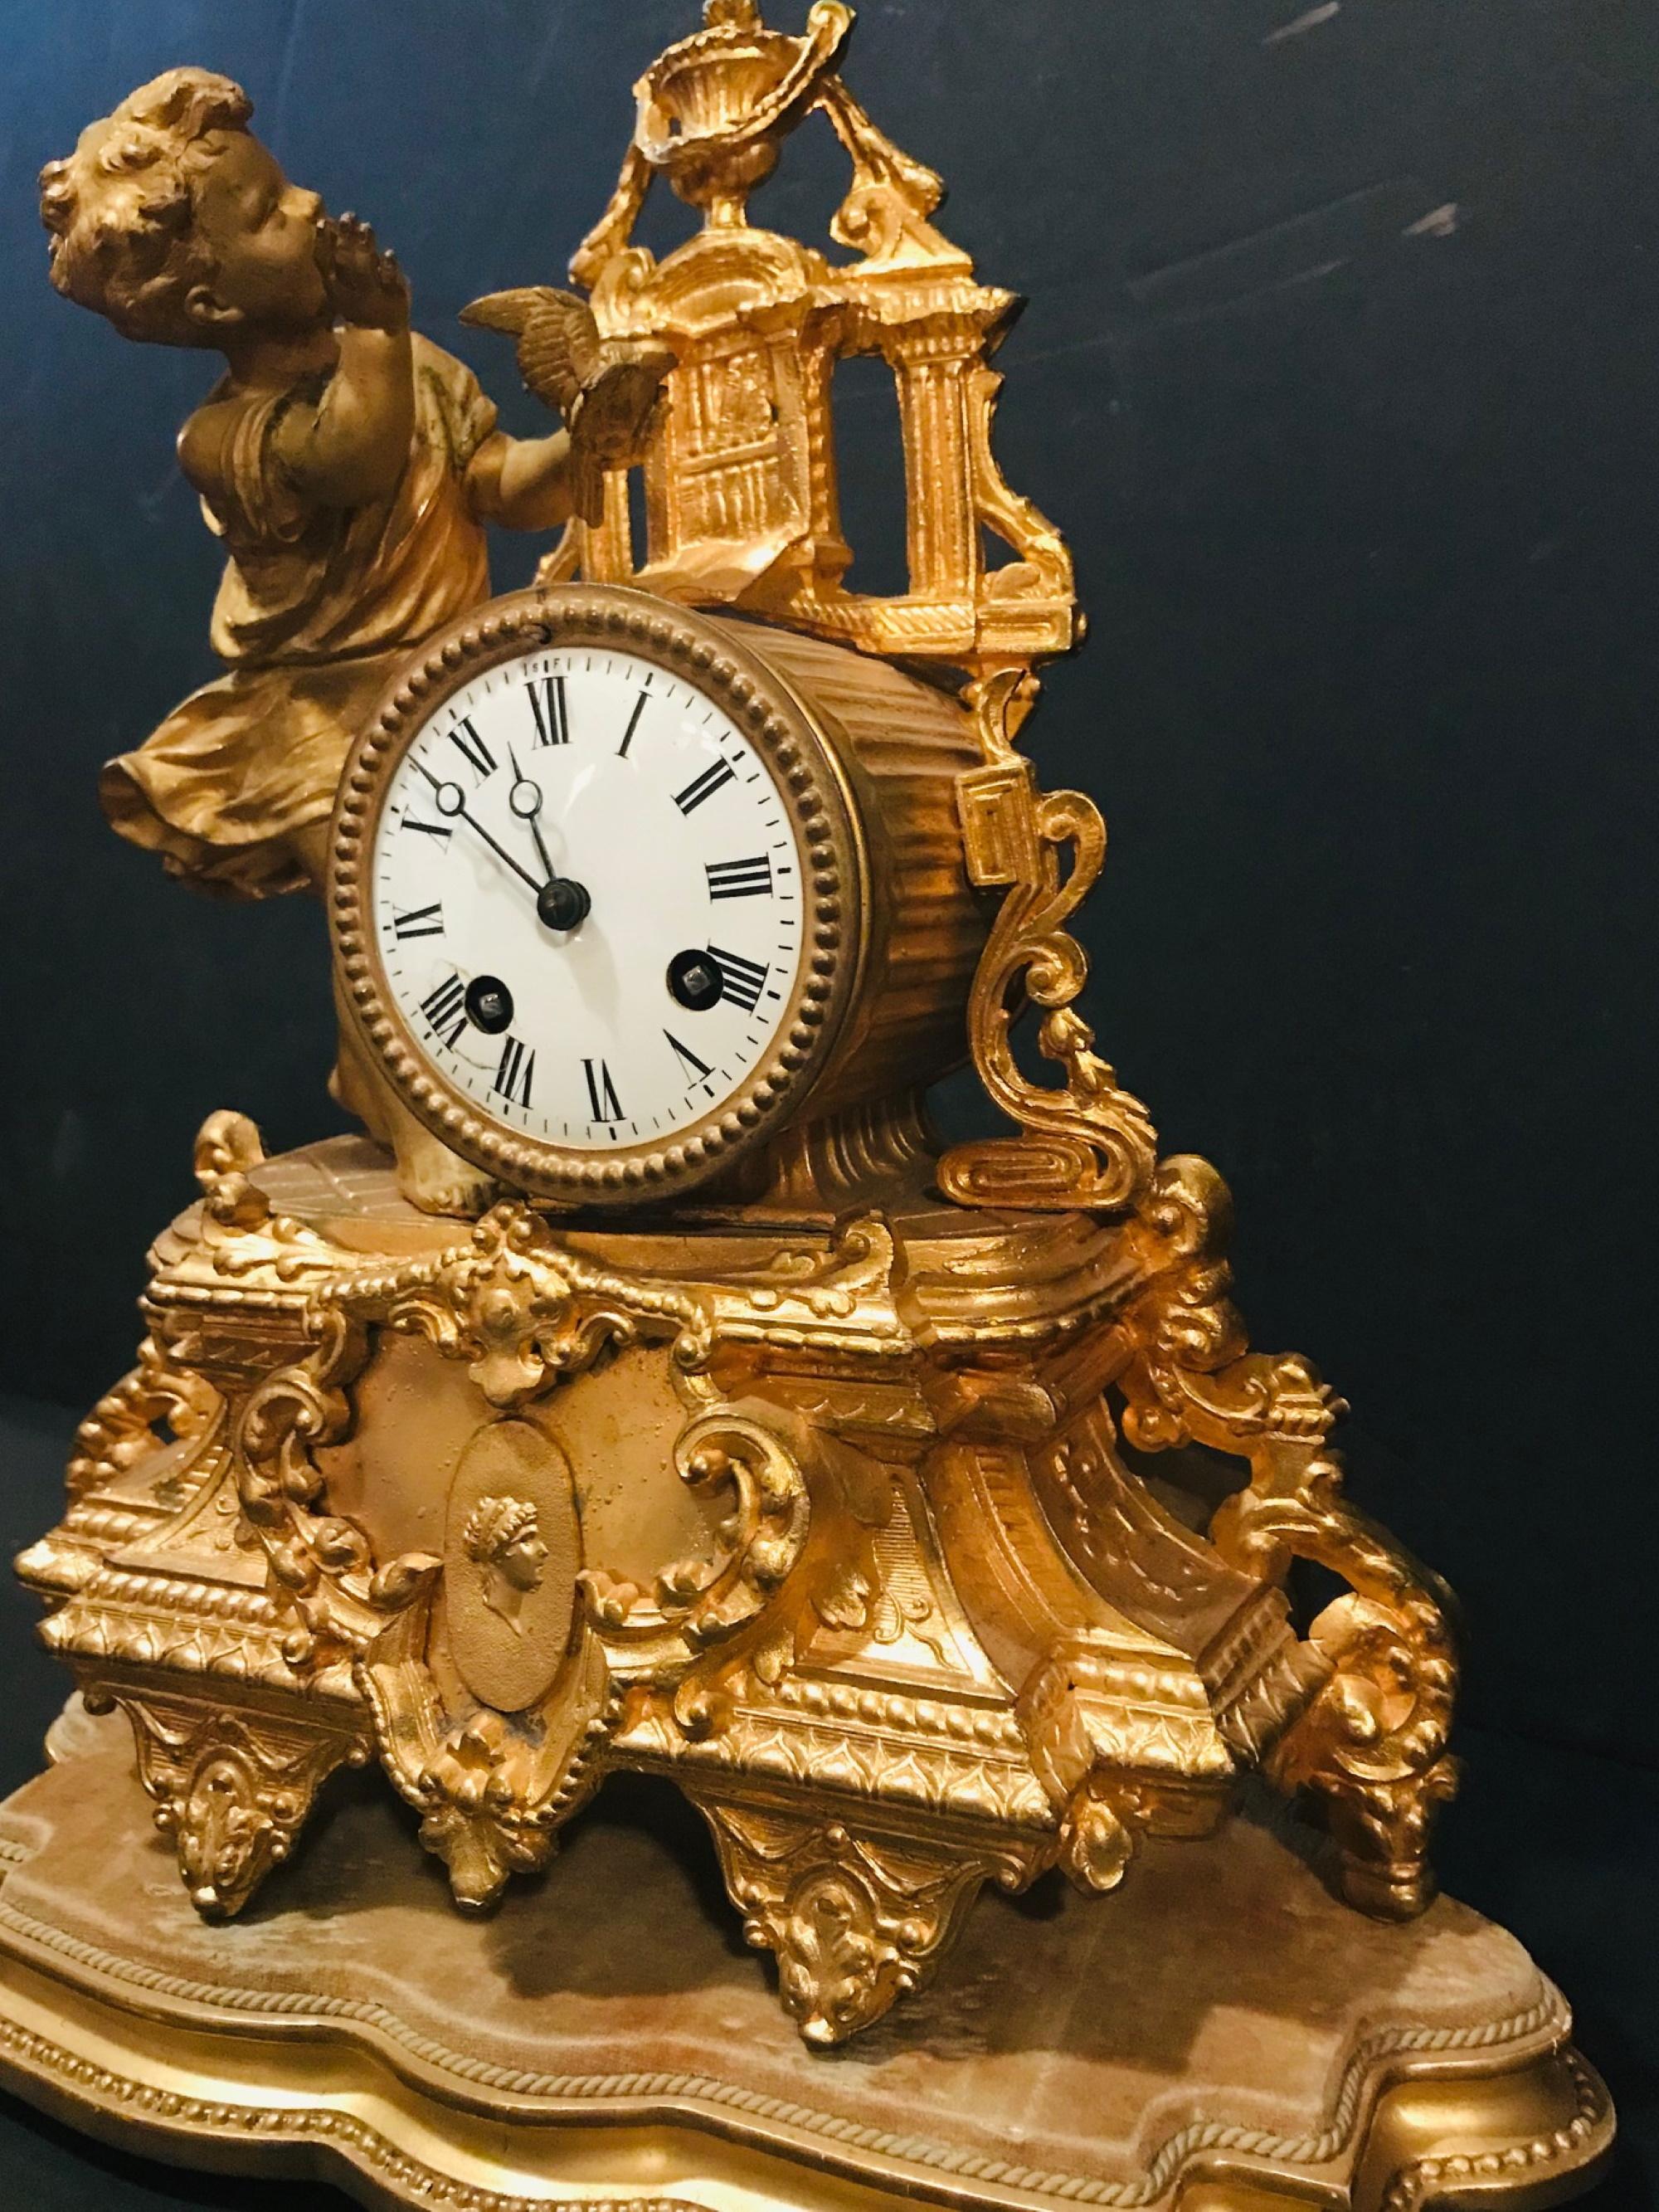 19th century French gilt mantel clock with wood base, girl with bird 

This Napoleon III ornate mantel (fireplace) clock has a great gilt finish. It was created in France in the late 19th century. The clock sits on it's original velvet covered wood